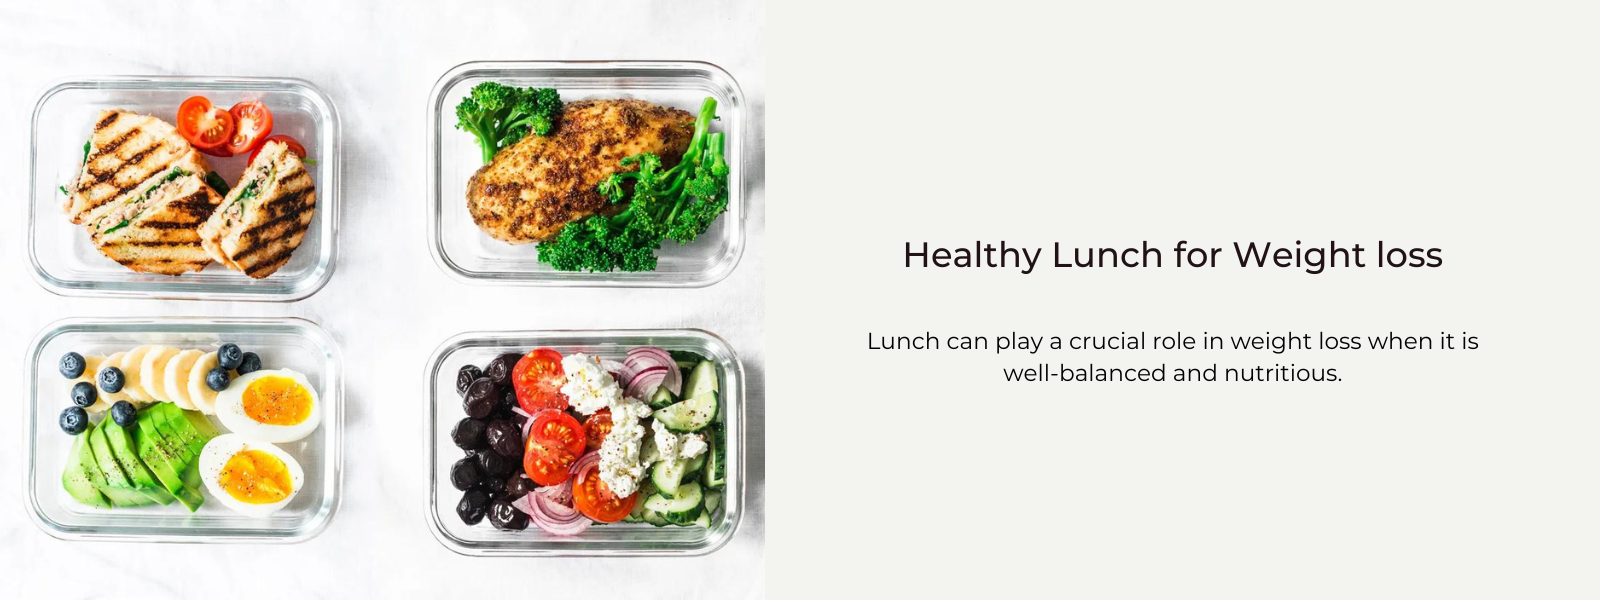 Healthy Lunch for Weight loss: Must-try Meal Ideas